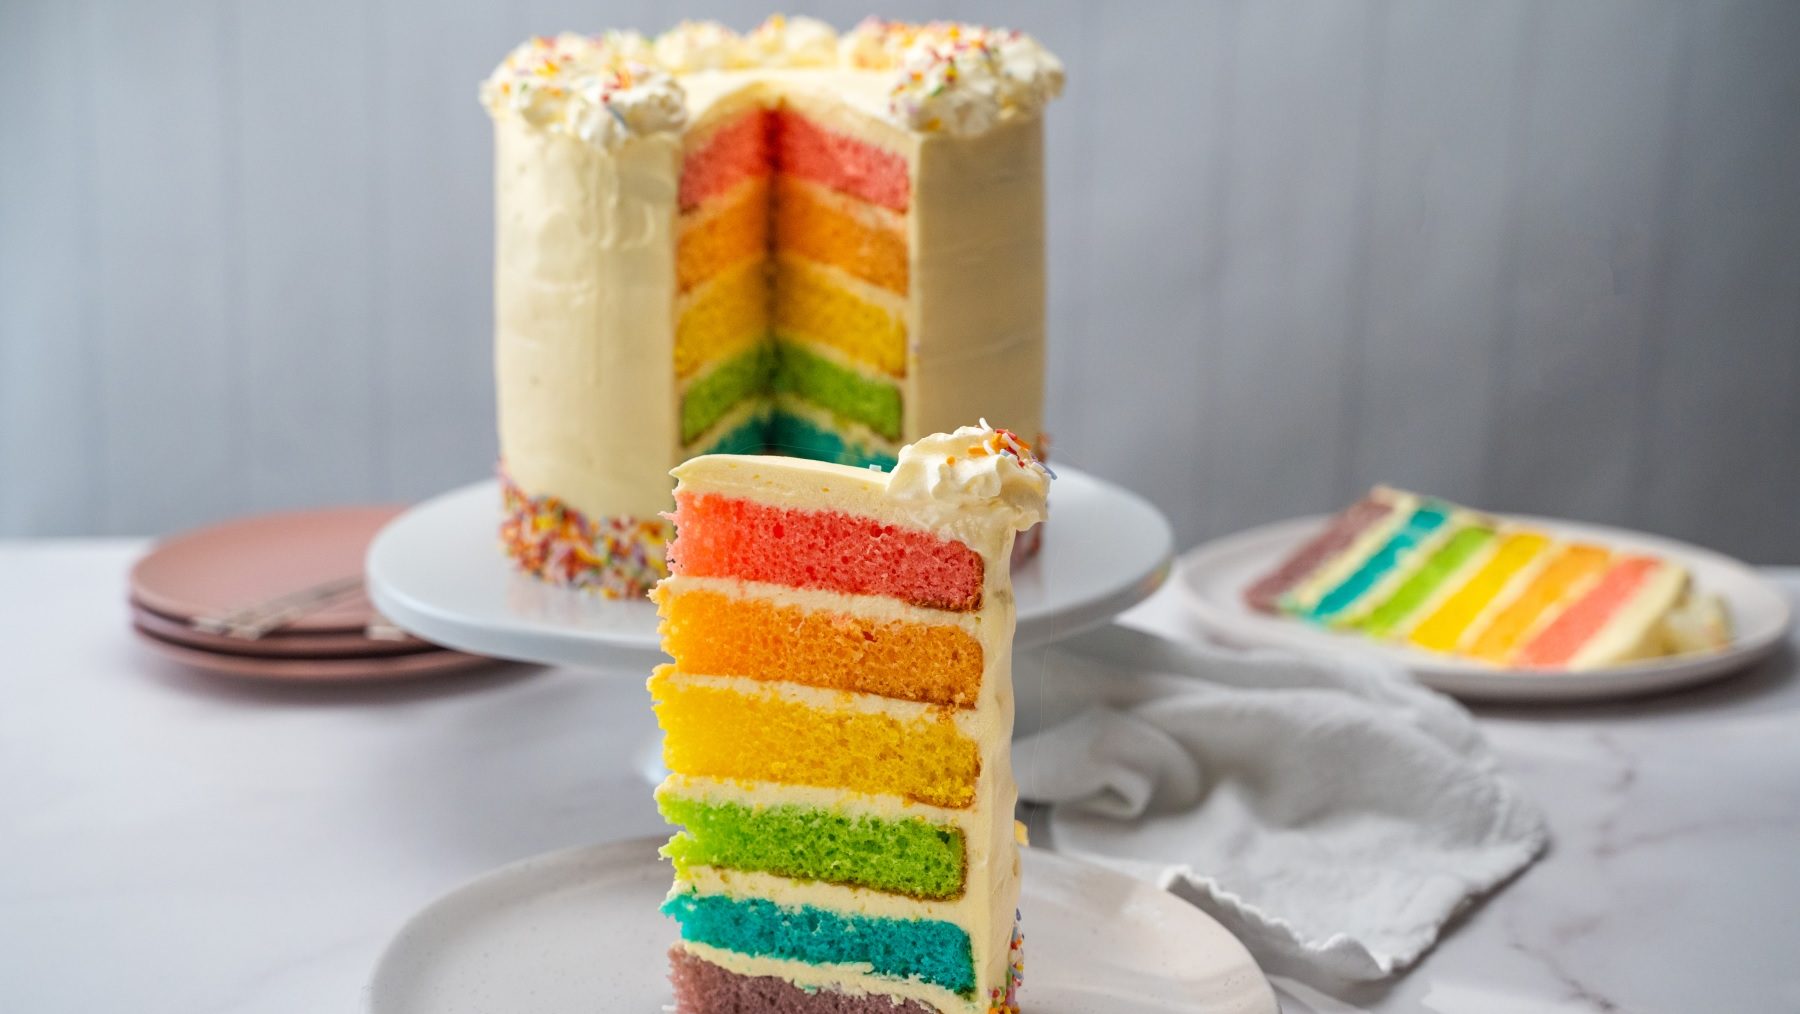 A wedge of tall rainbow coloured sponge layer cake on a plate out of the whole one.